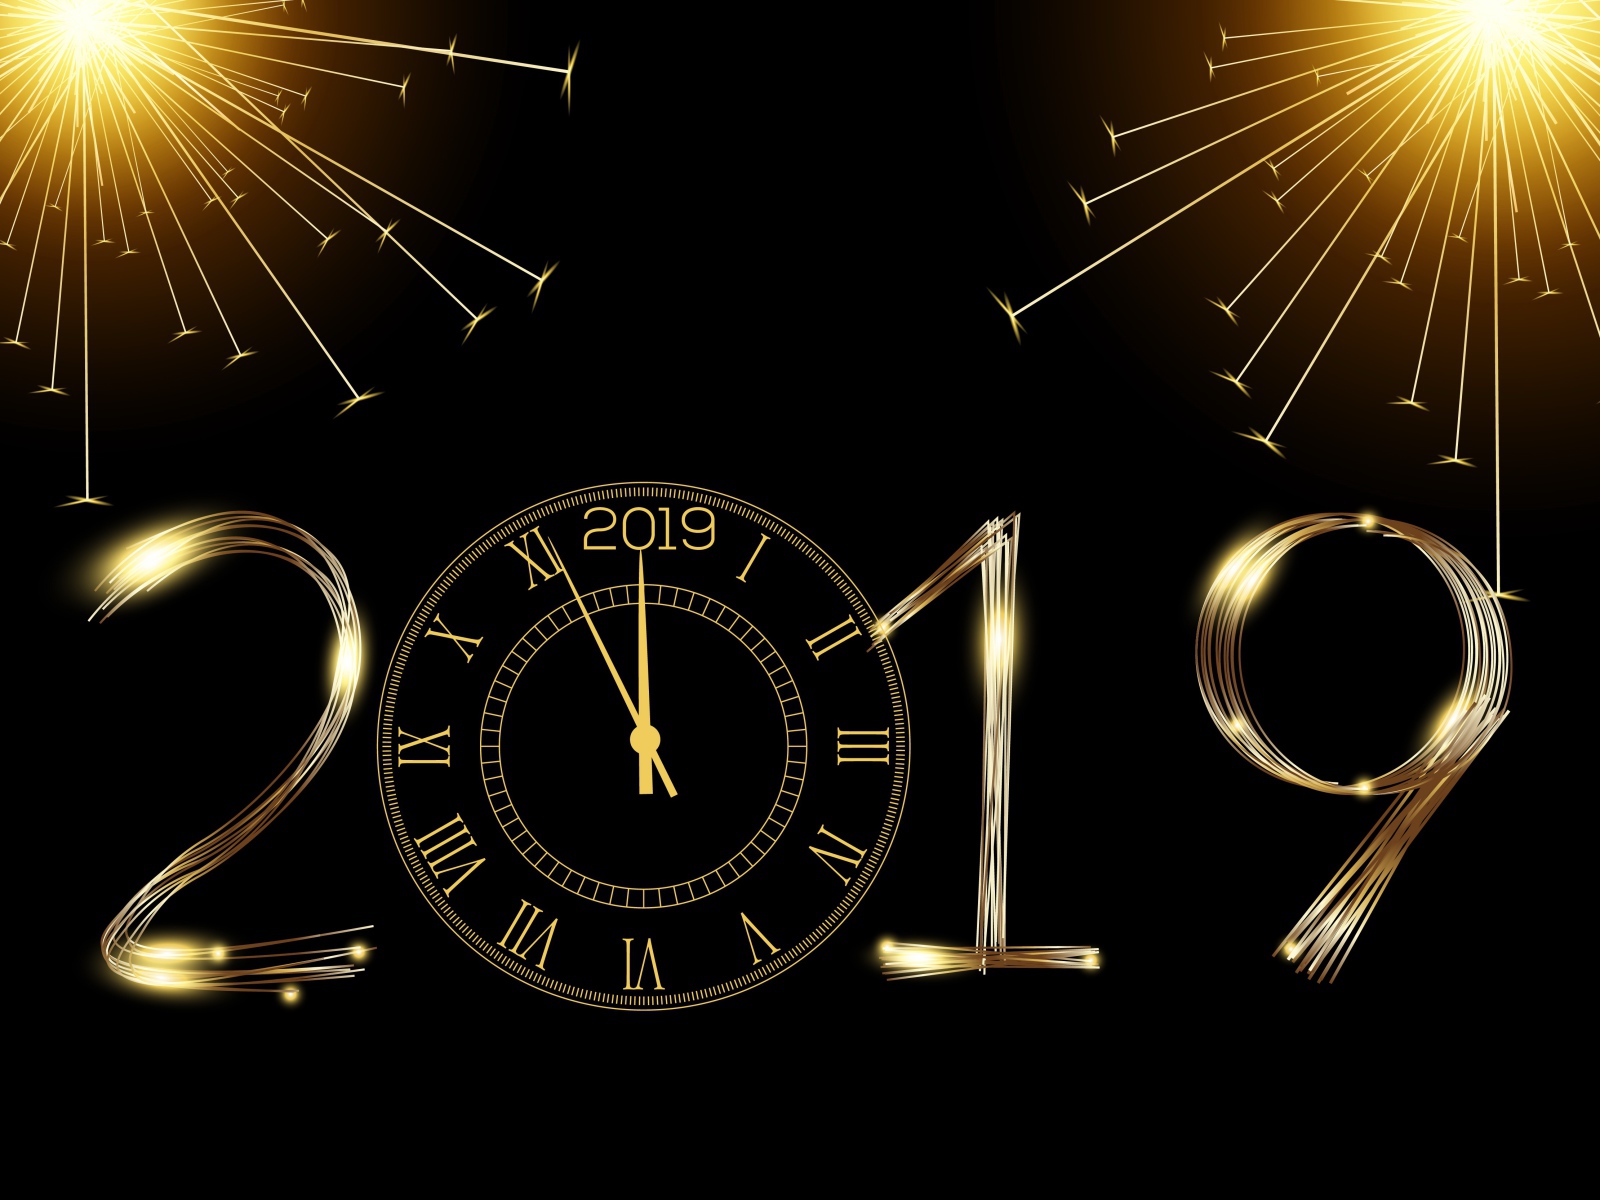 Bright numbers 2019 with a clock on a black background.